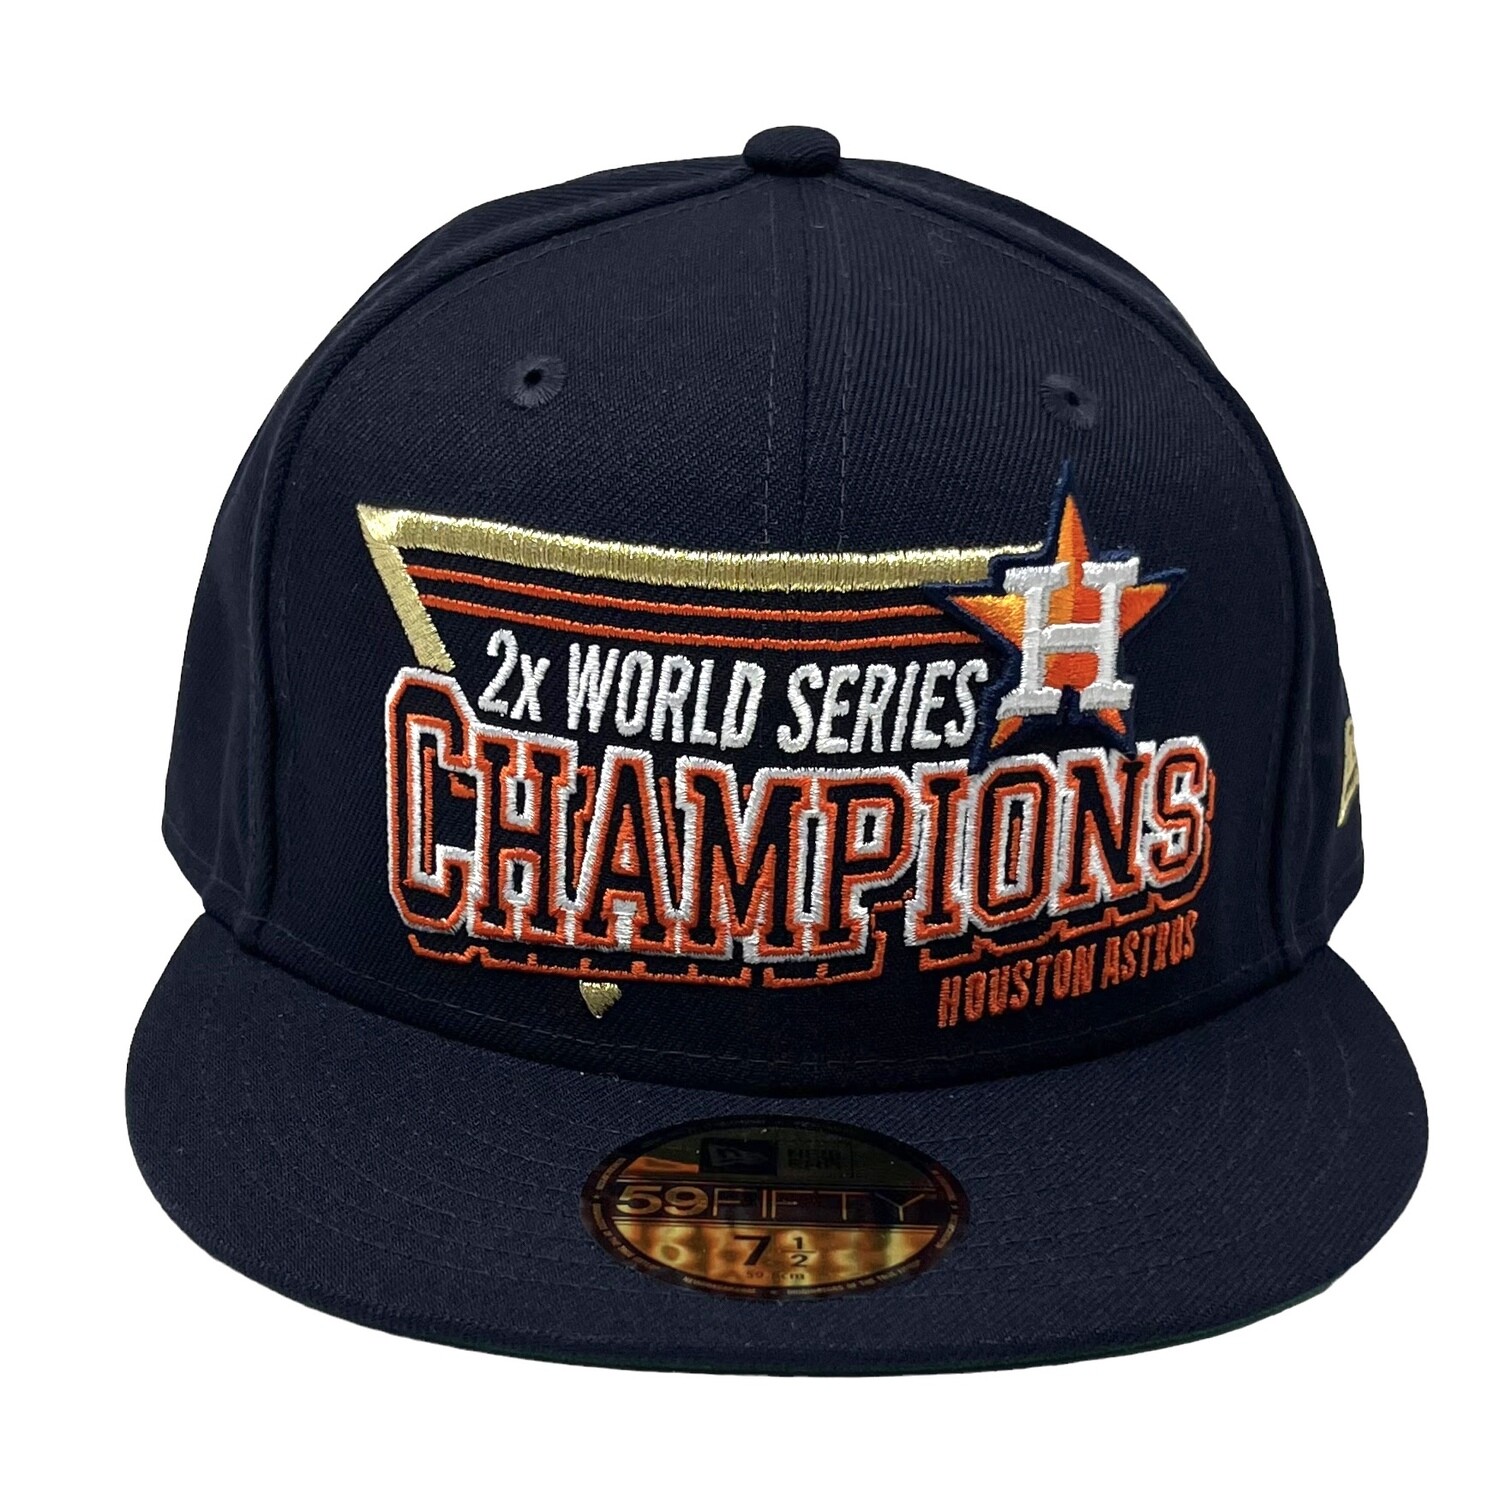 Houston Astros Men's 2X World Series Champions New Era 59Fifty Fitted Hat